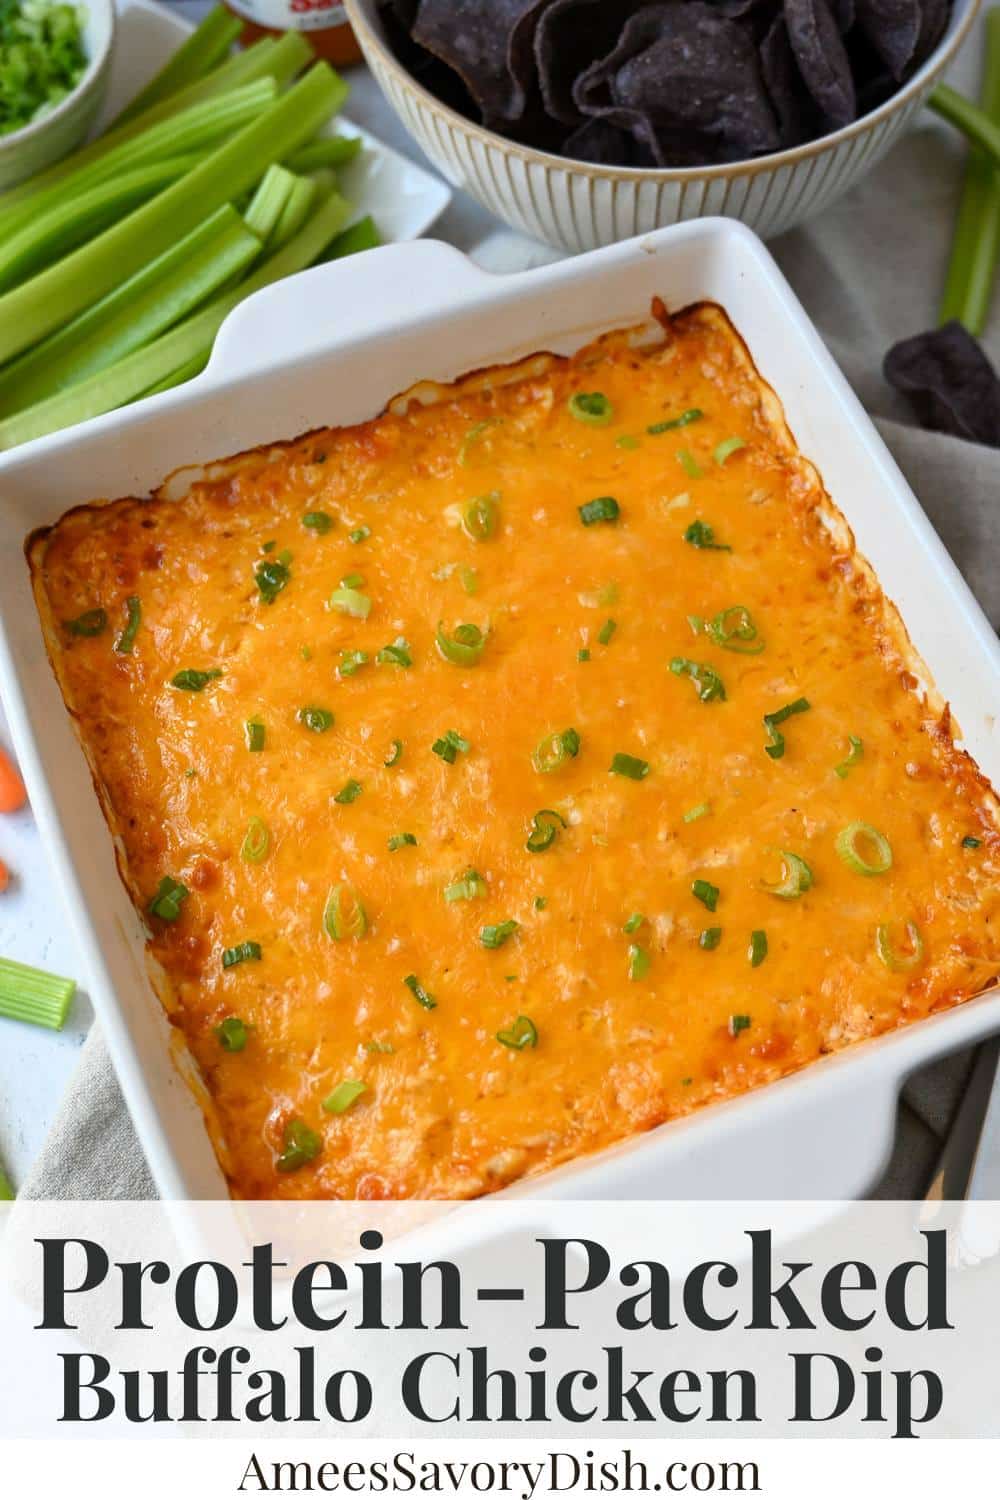 This easy recipe transforms rotisserie chicken, Greek yogurt, cottage cheese, cheddar cheese, and tangy buffalo sauce into a protein-packed dip everyone will love! via @Ameessavorydish